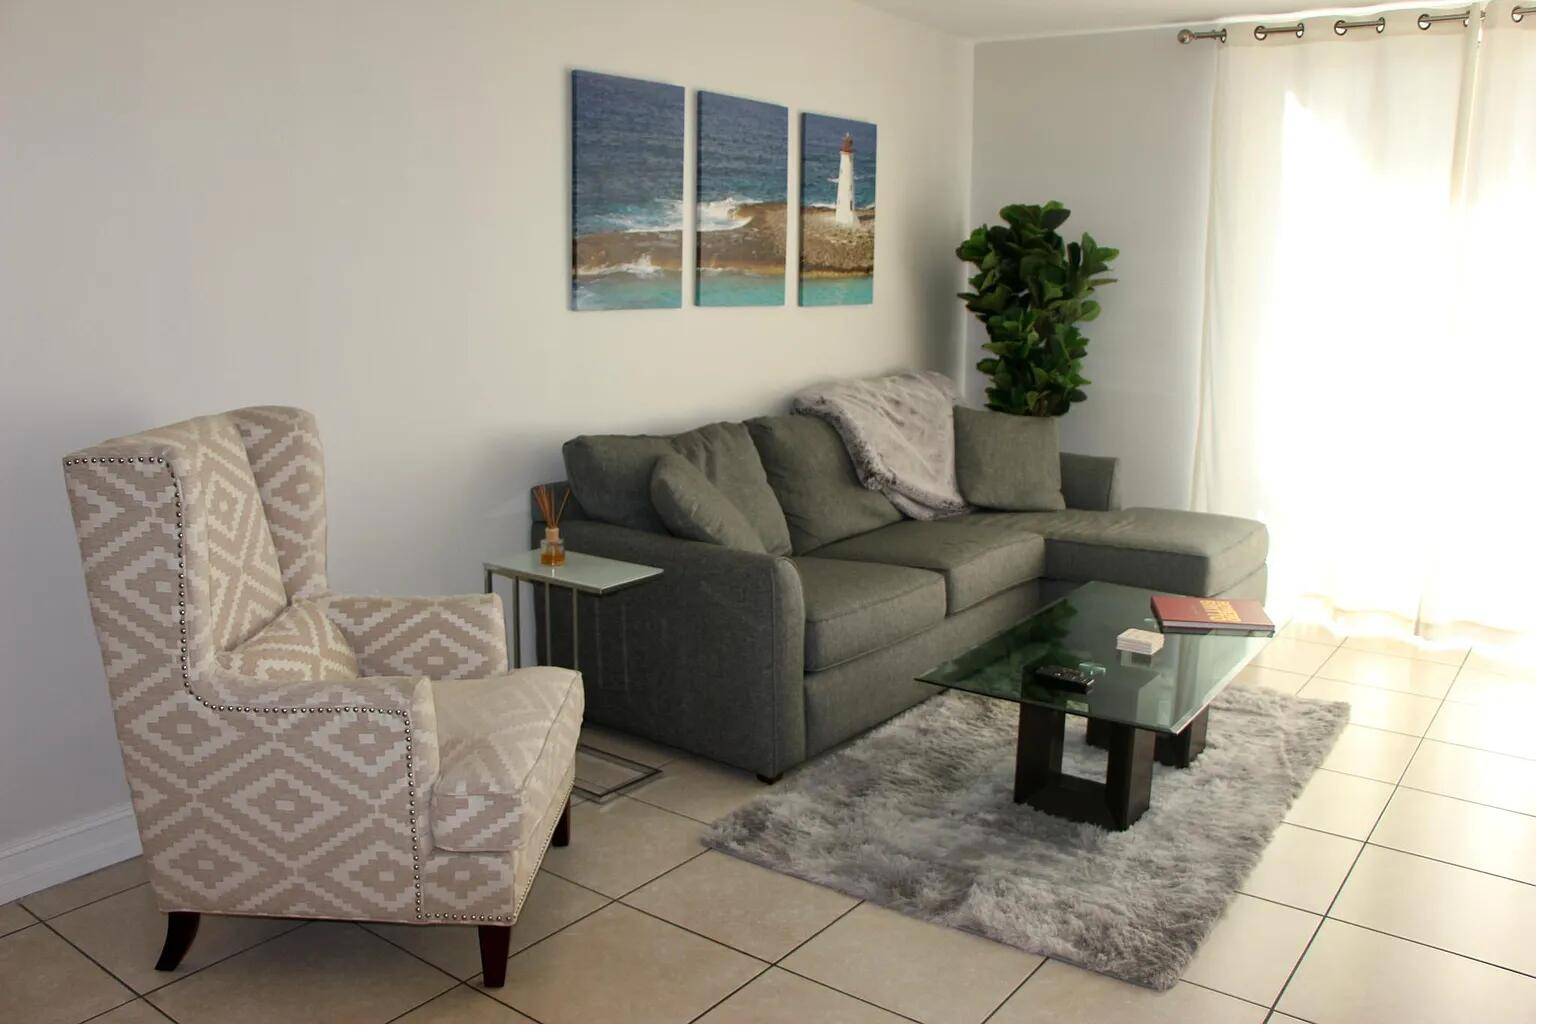 PRIME Miami location ! Come check out this large FULLY FURNISHED apartment located in a midrise building walking distance to Miracle Mile !